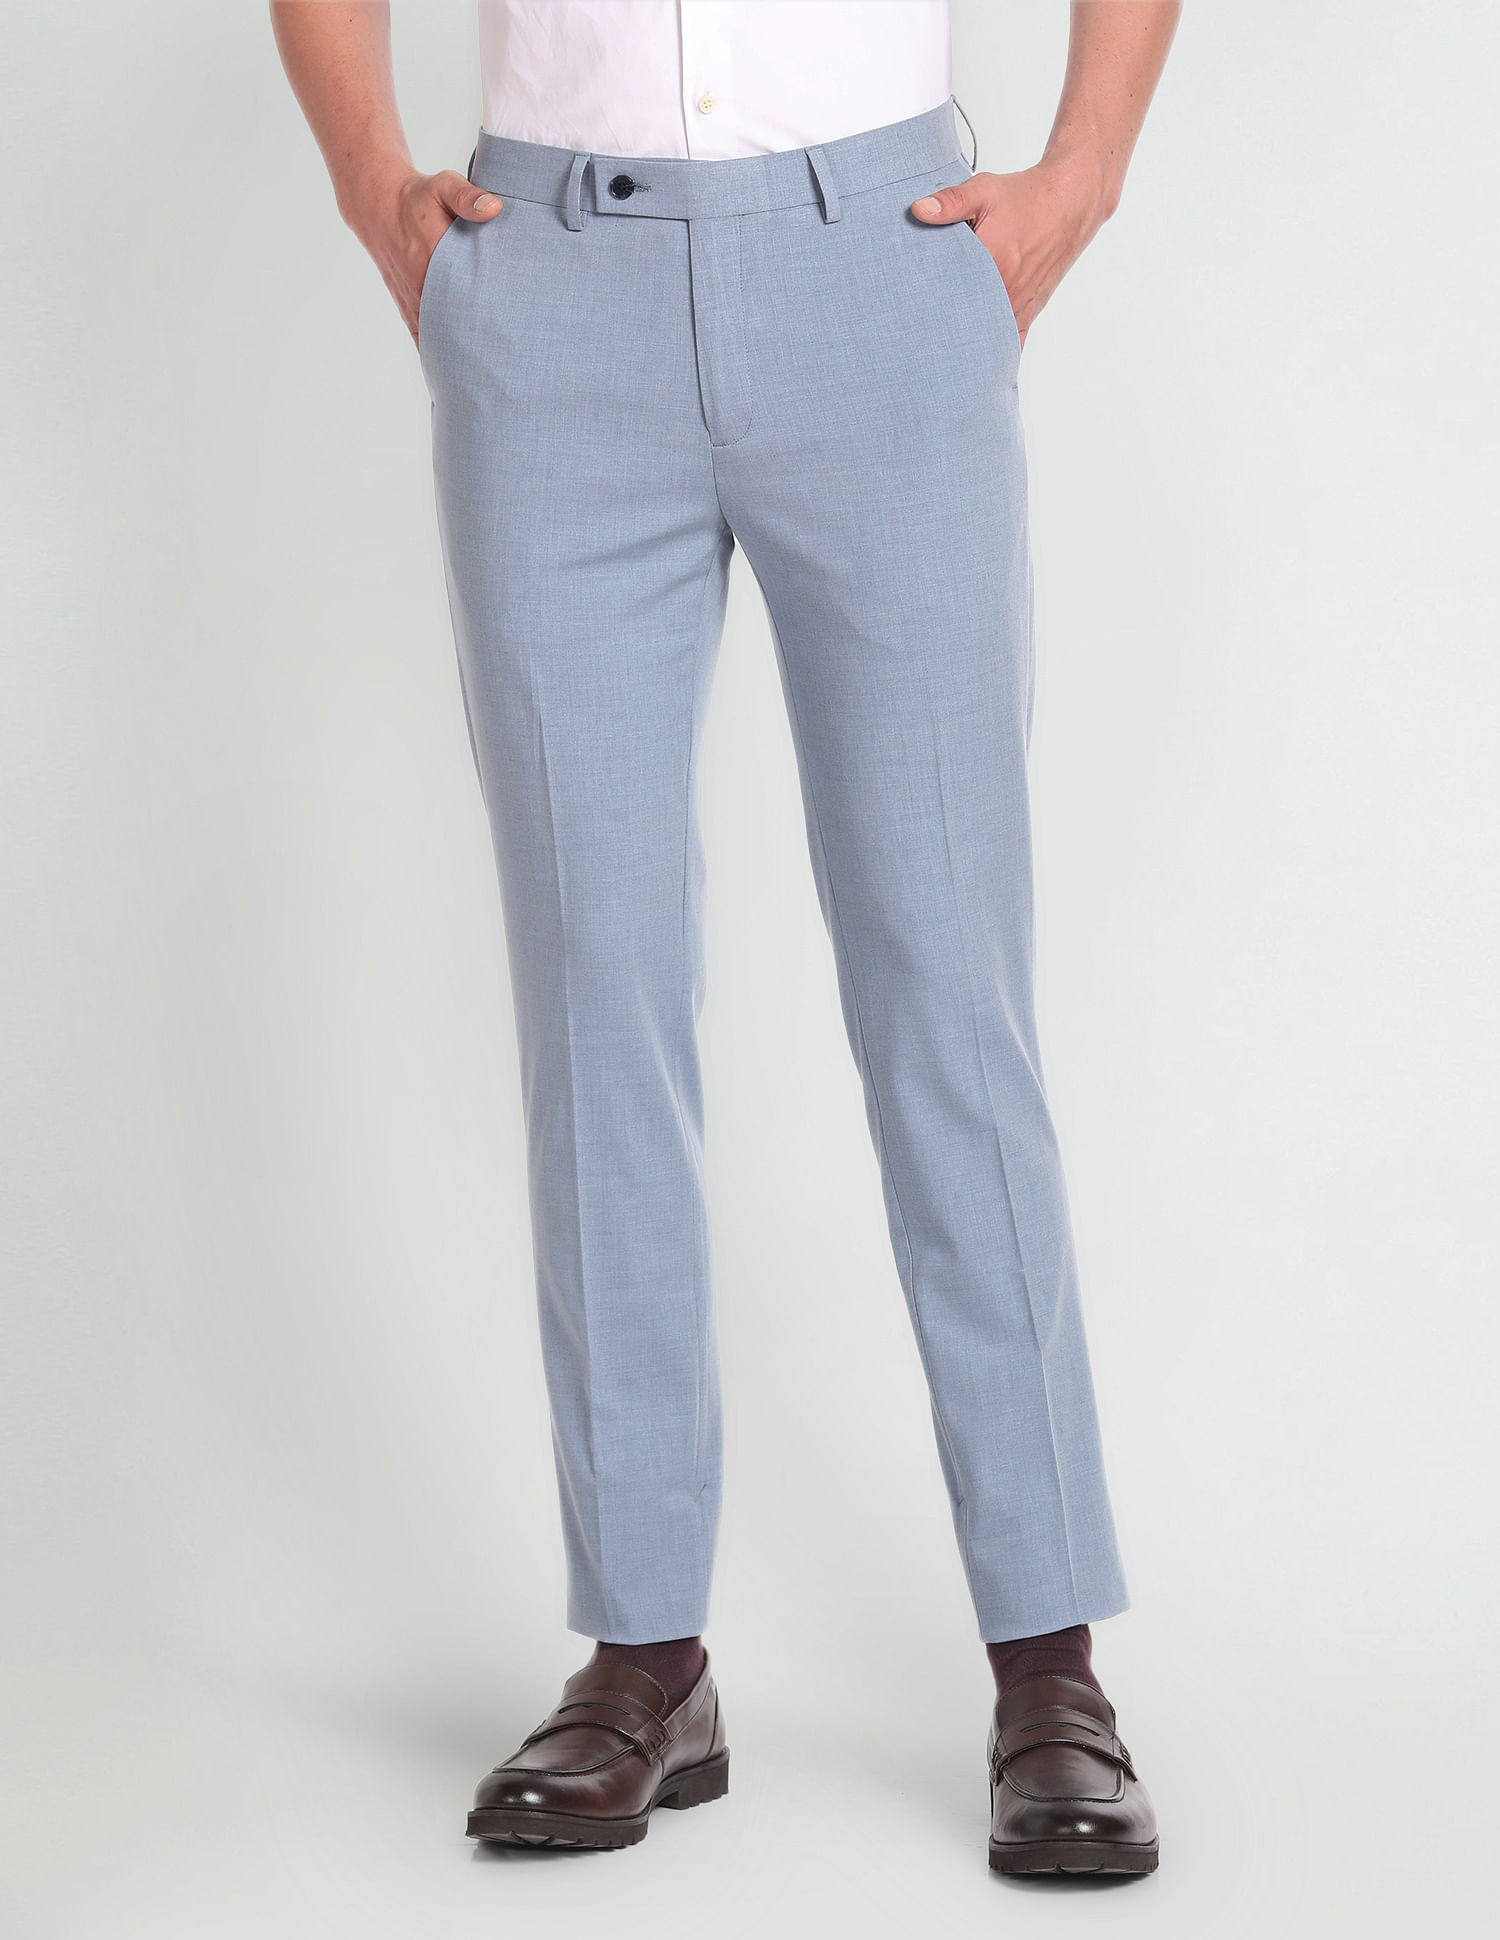 Men's Formal 4 way Stretch Trousers in Light Grey Slim Fit